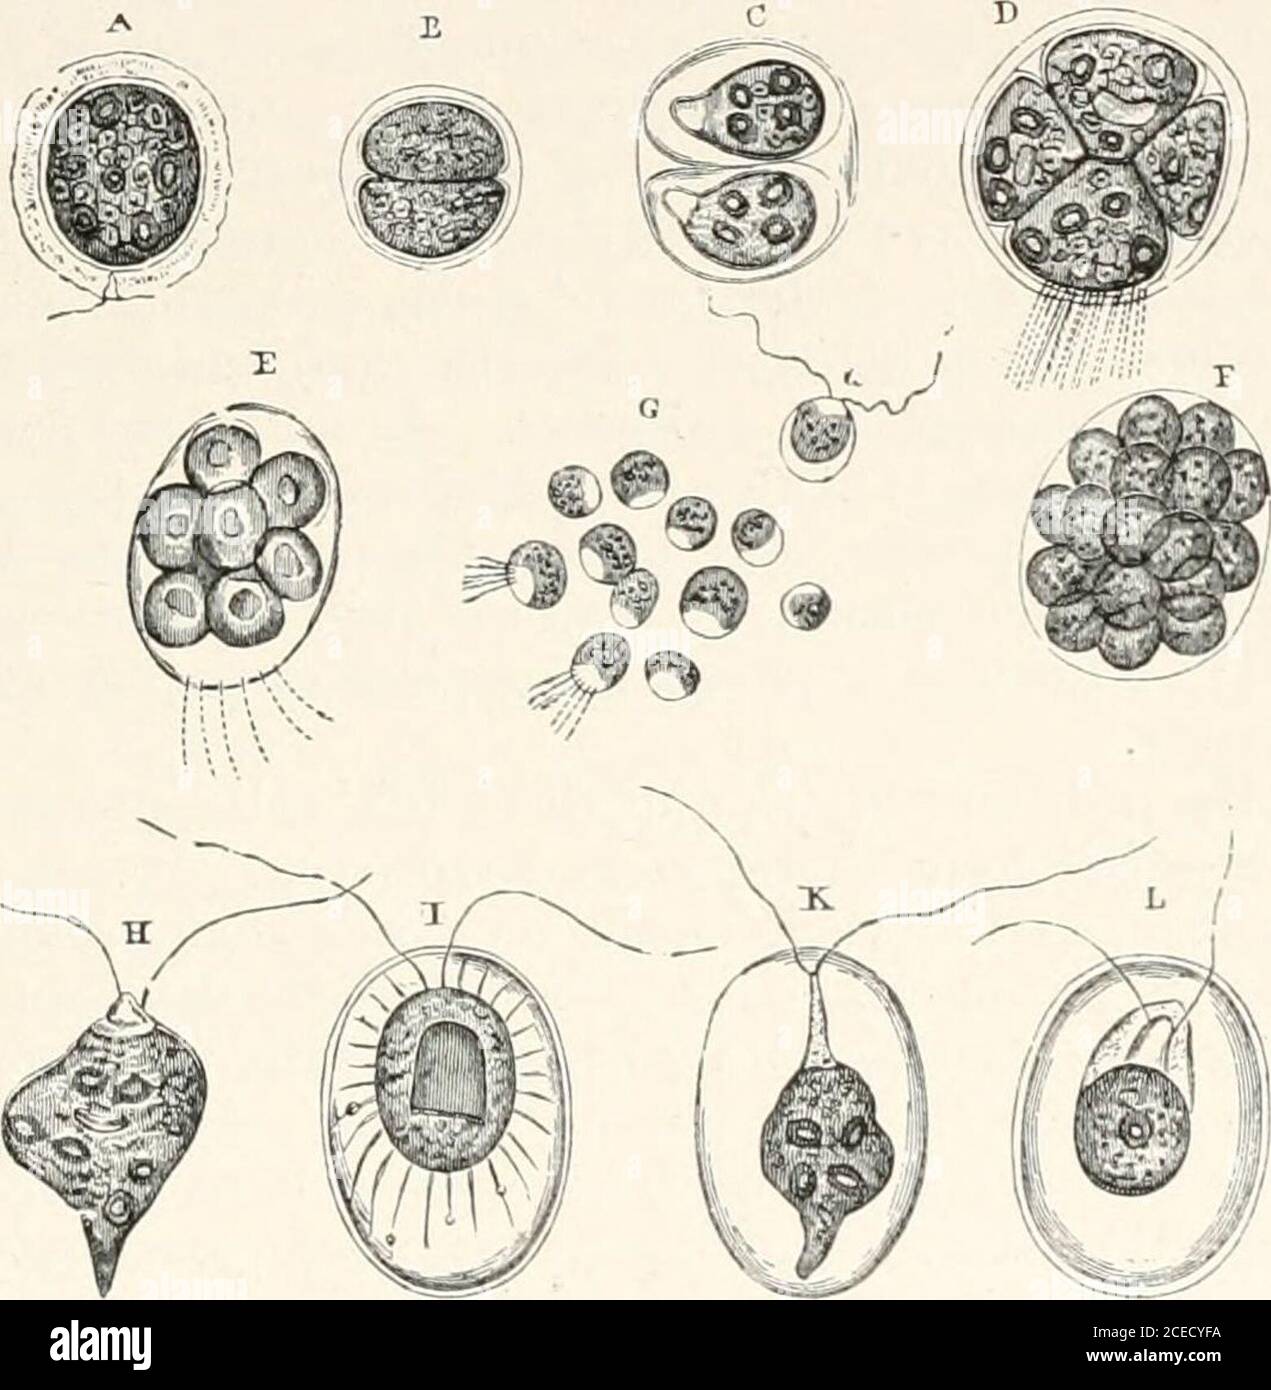 The microscope and its revelations. ethcr hand, a converse change occurs;  the oil-globules disappear,and green granular matter takes their place.  STRUCTURE OF PROTOCOCCUS 543 If this (as seems probable) constitutes the